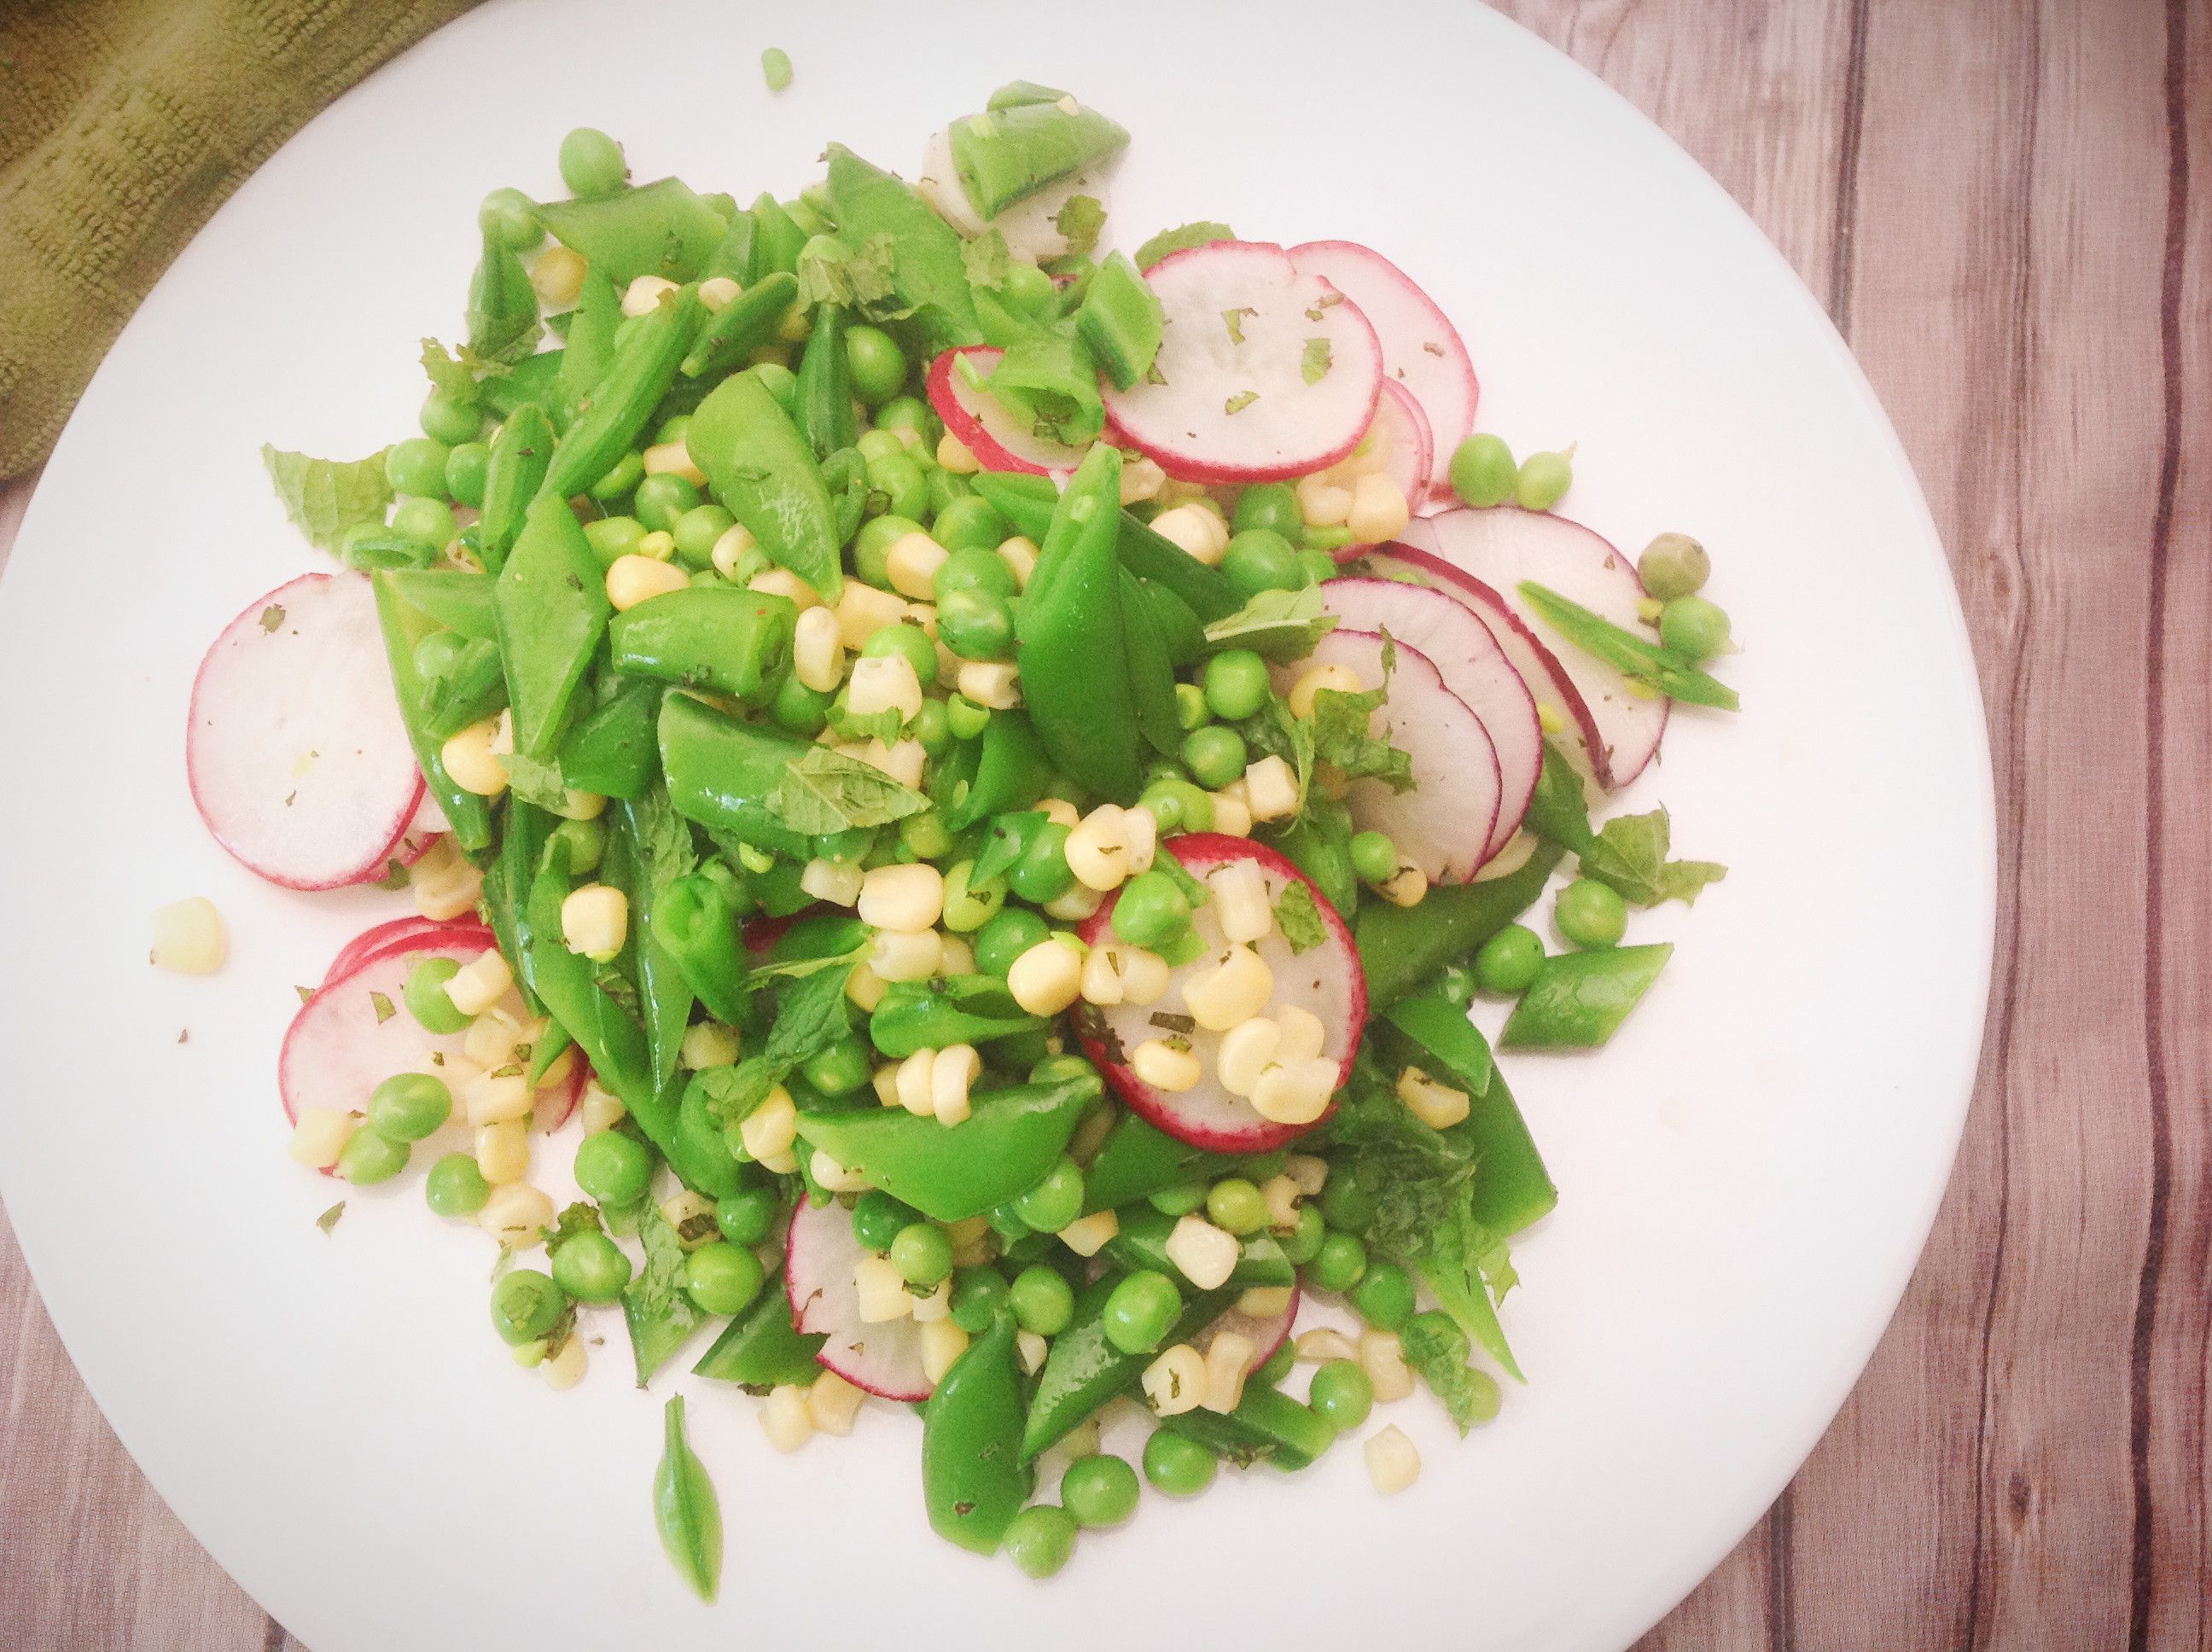 https://plants-rule.com/wp-content/uploads/2019/07/Fresh-Snap-Pea-Salad-with-Radish-Corn-and-Mint-Healthy-Plant-Based-Oil-Free-Gluten-Free-Vegan-Recipe-from-Plants-Rule-6.jpg